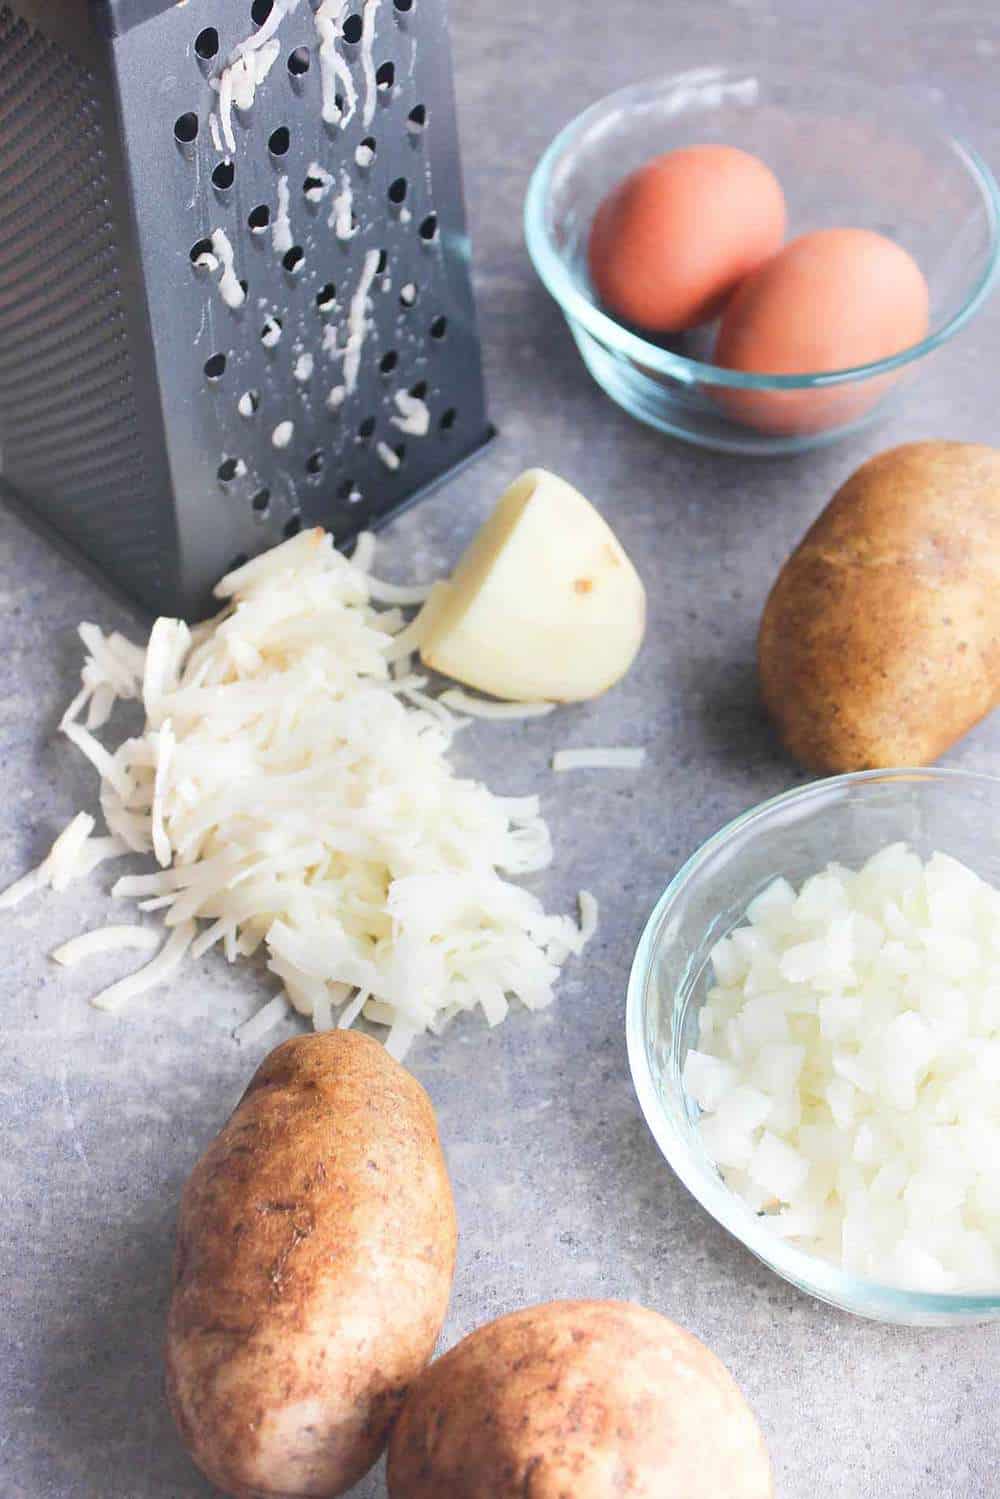 A box grater with grated onion near it sitting next a small bowl filled with two eggs, a bowl of shredded onions, and several russet potatoes